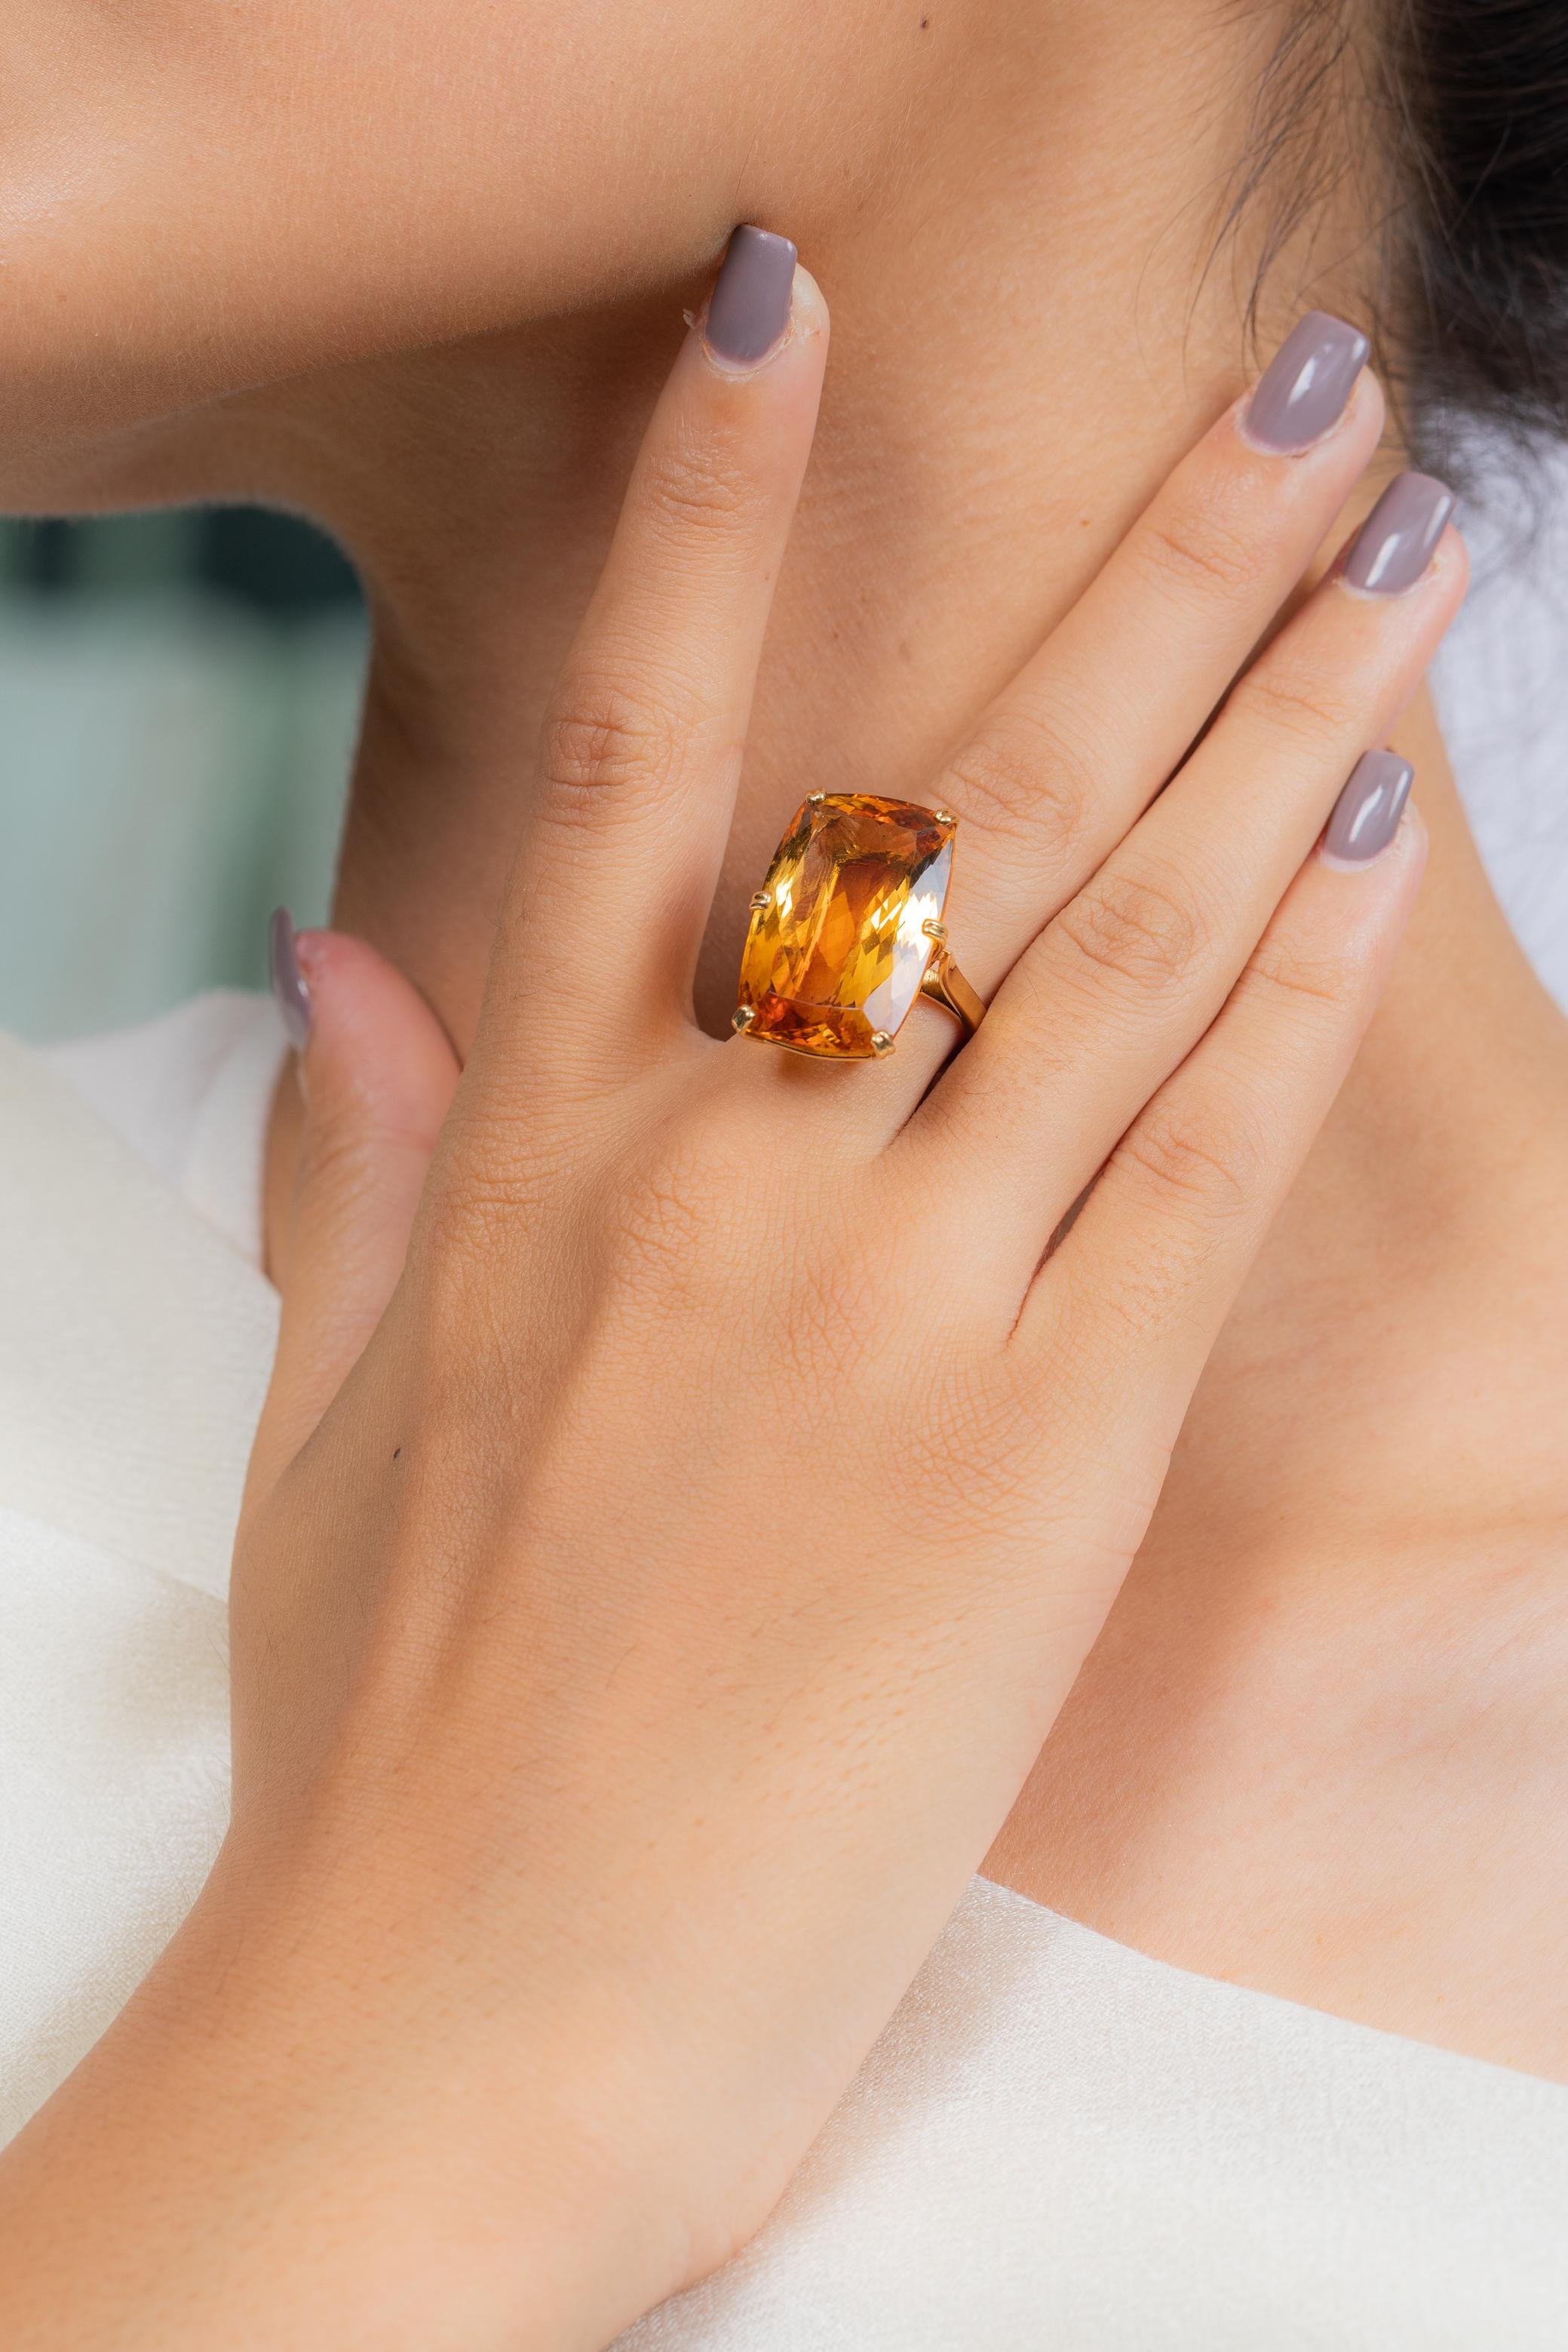 For Sale:  28.8 Ct Cushion Cut Citrine Gemstone Cocktail Ring in 18K Yellow Gold 8